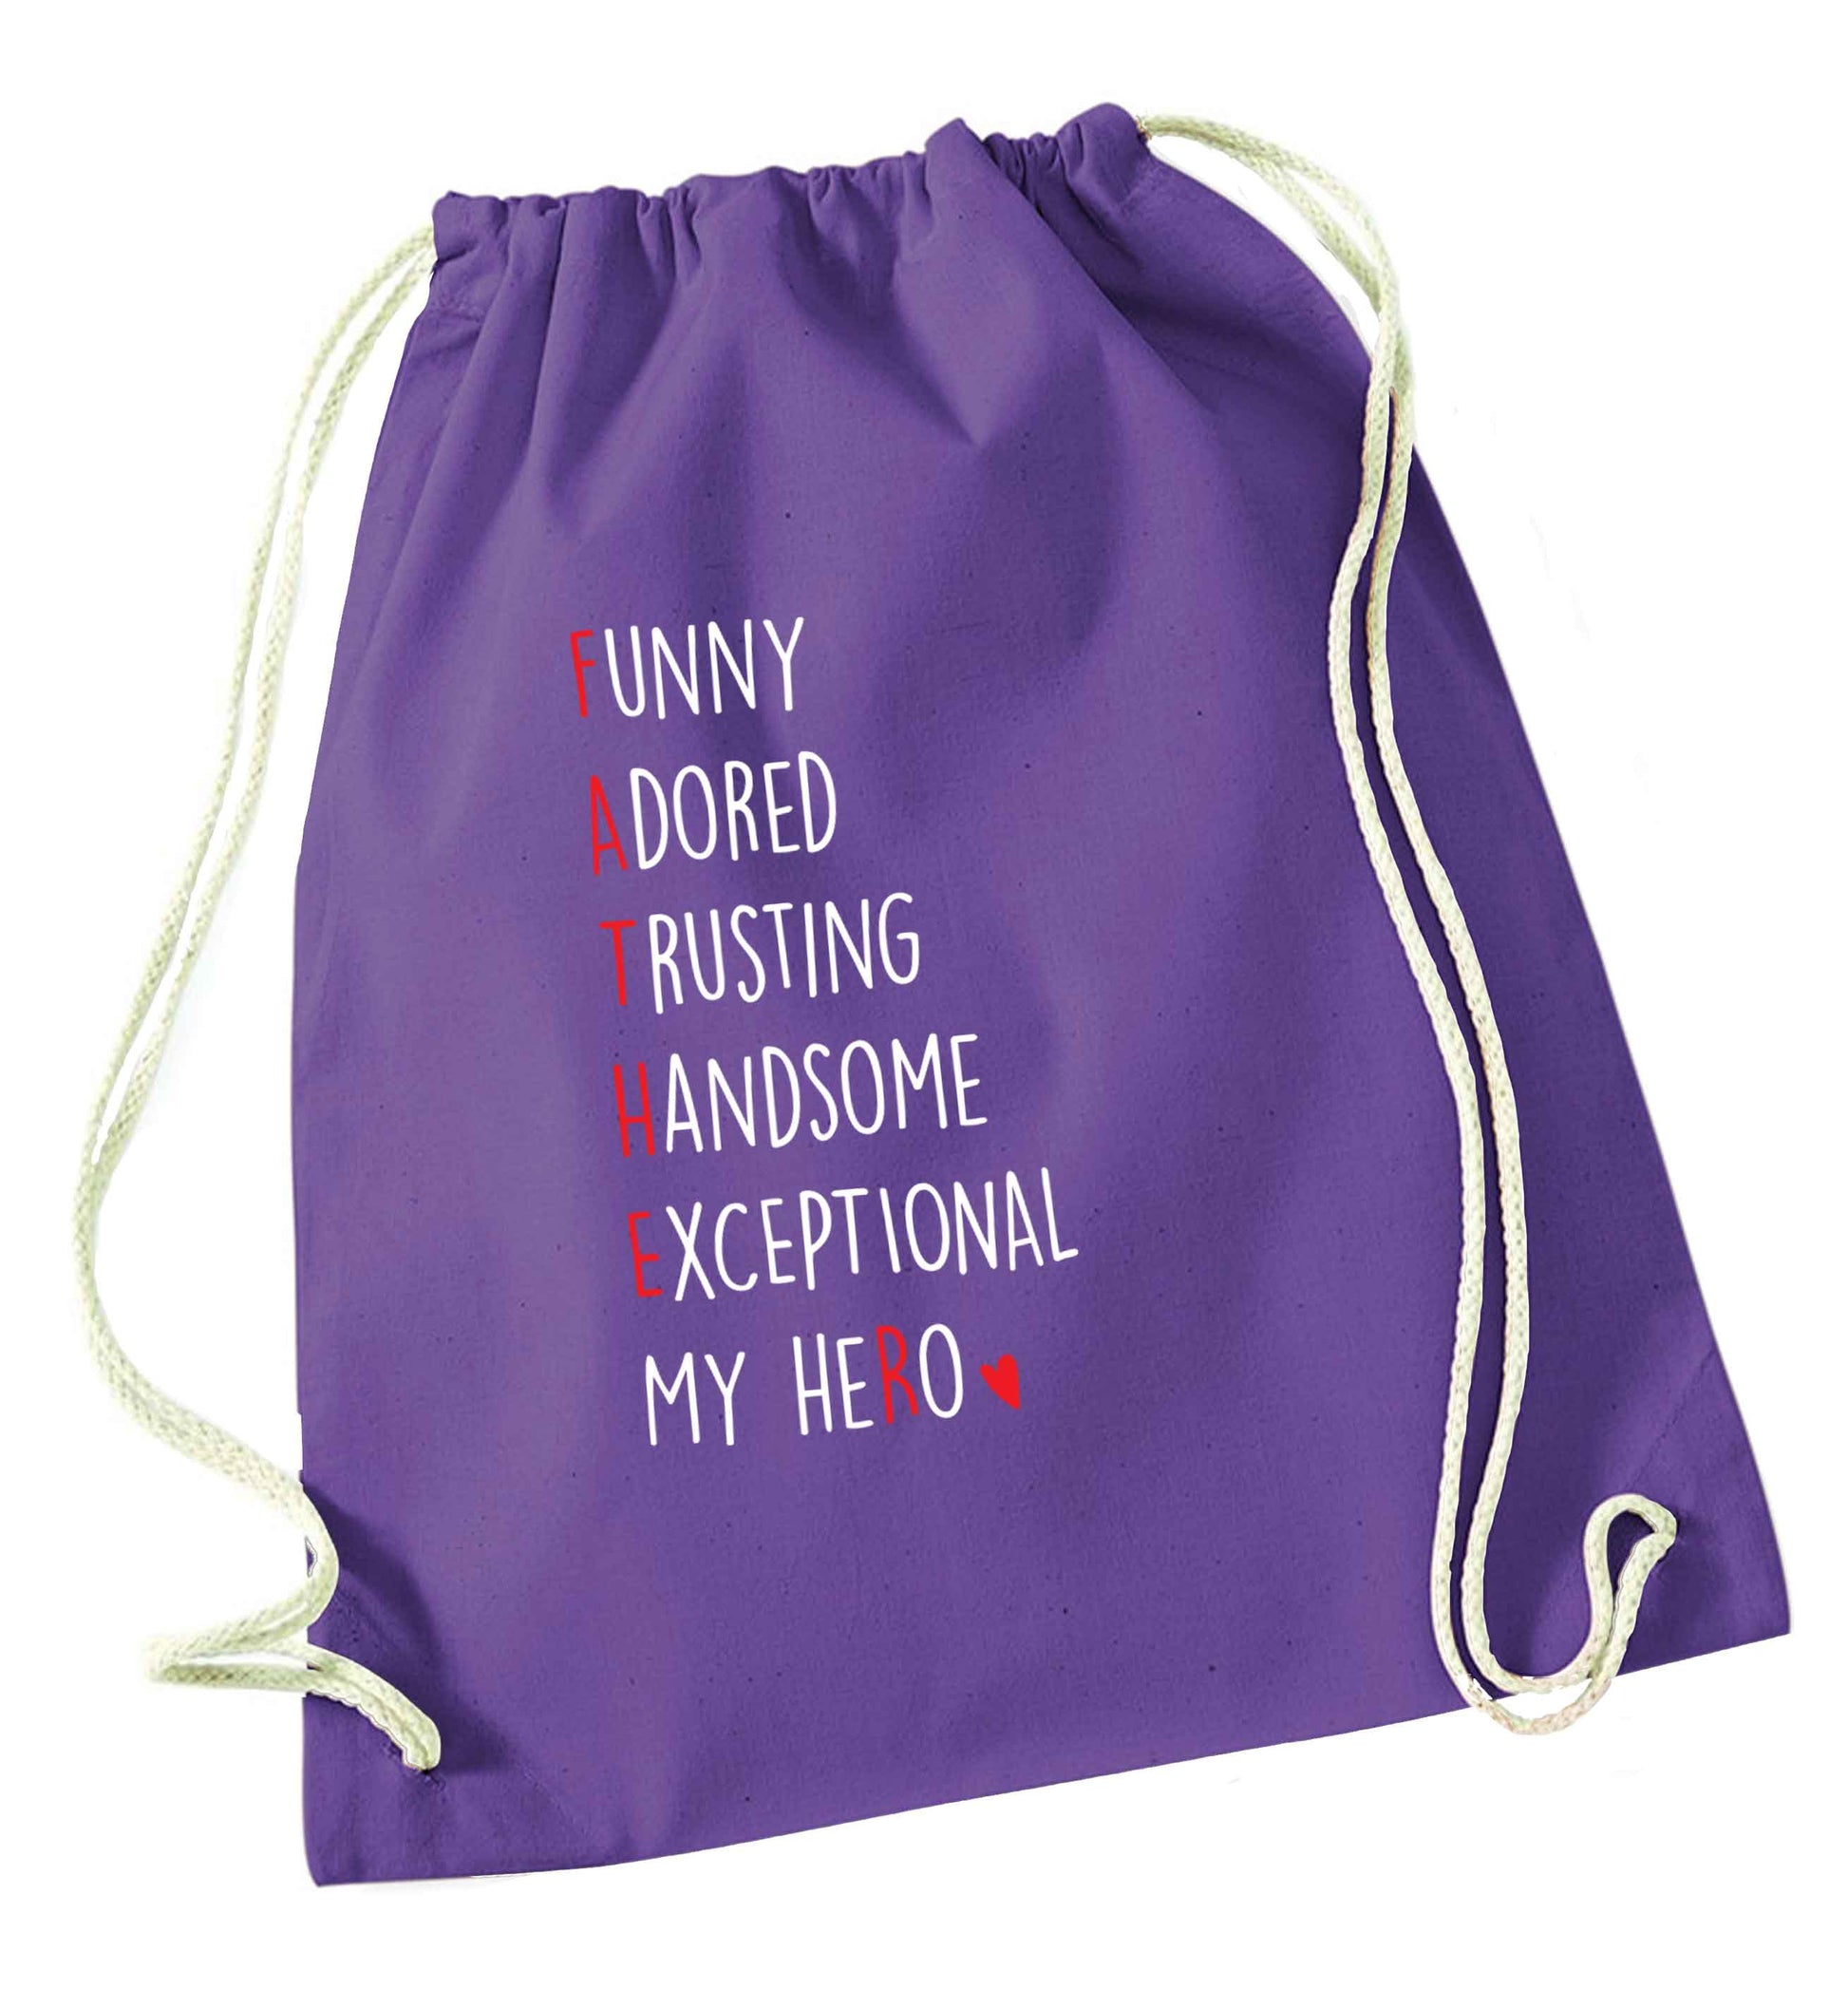 Father meaning hero acrostic poem purple drawstring bag